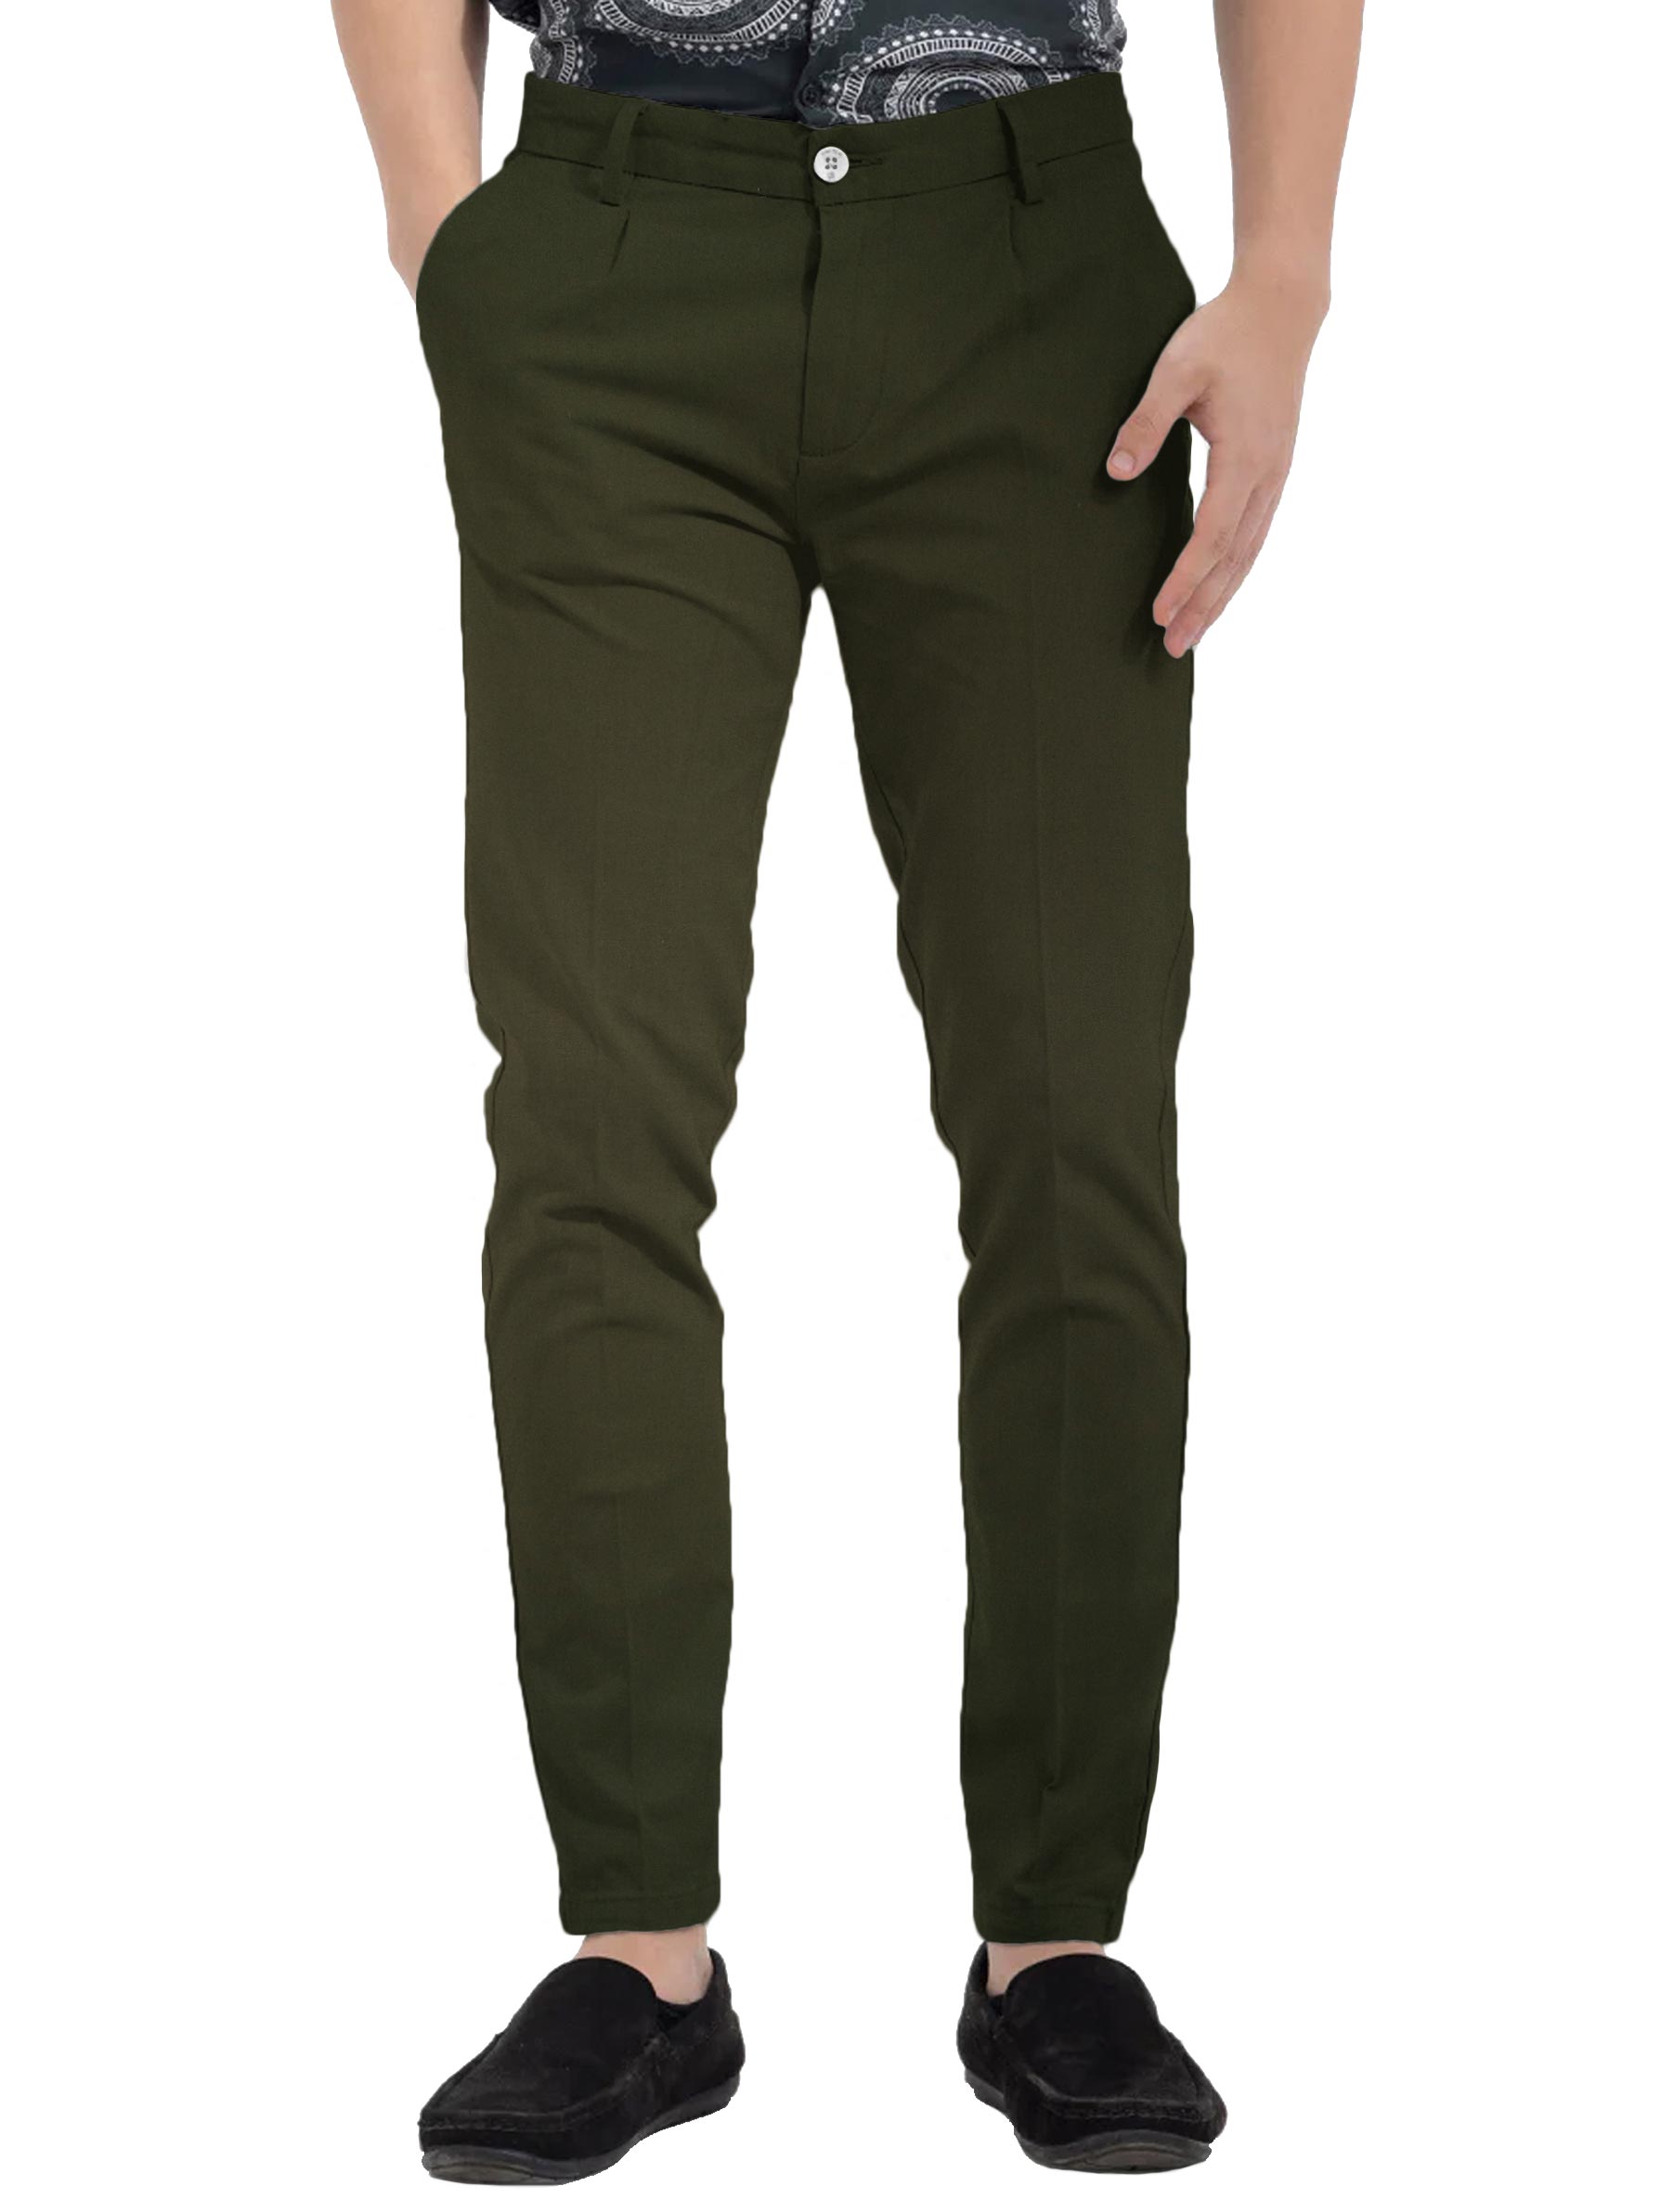 Buy British terminal khaki chinos for men  pant for man slim fit stretchable  trousers for men  slim fit pants for men  chinos pants for mens  cotton  chinos for